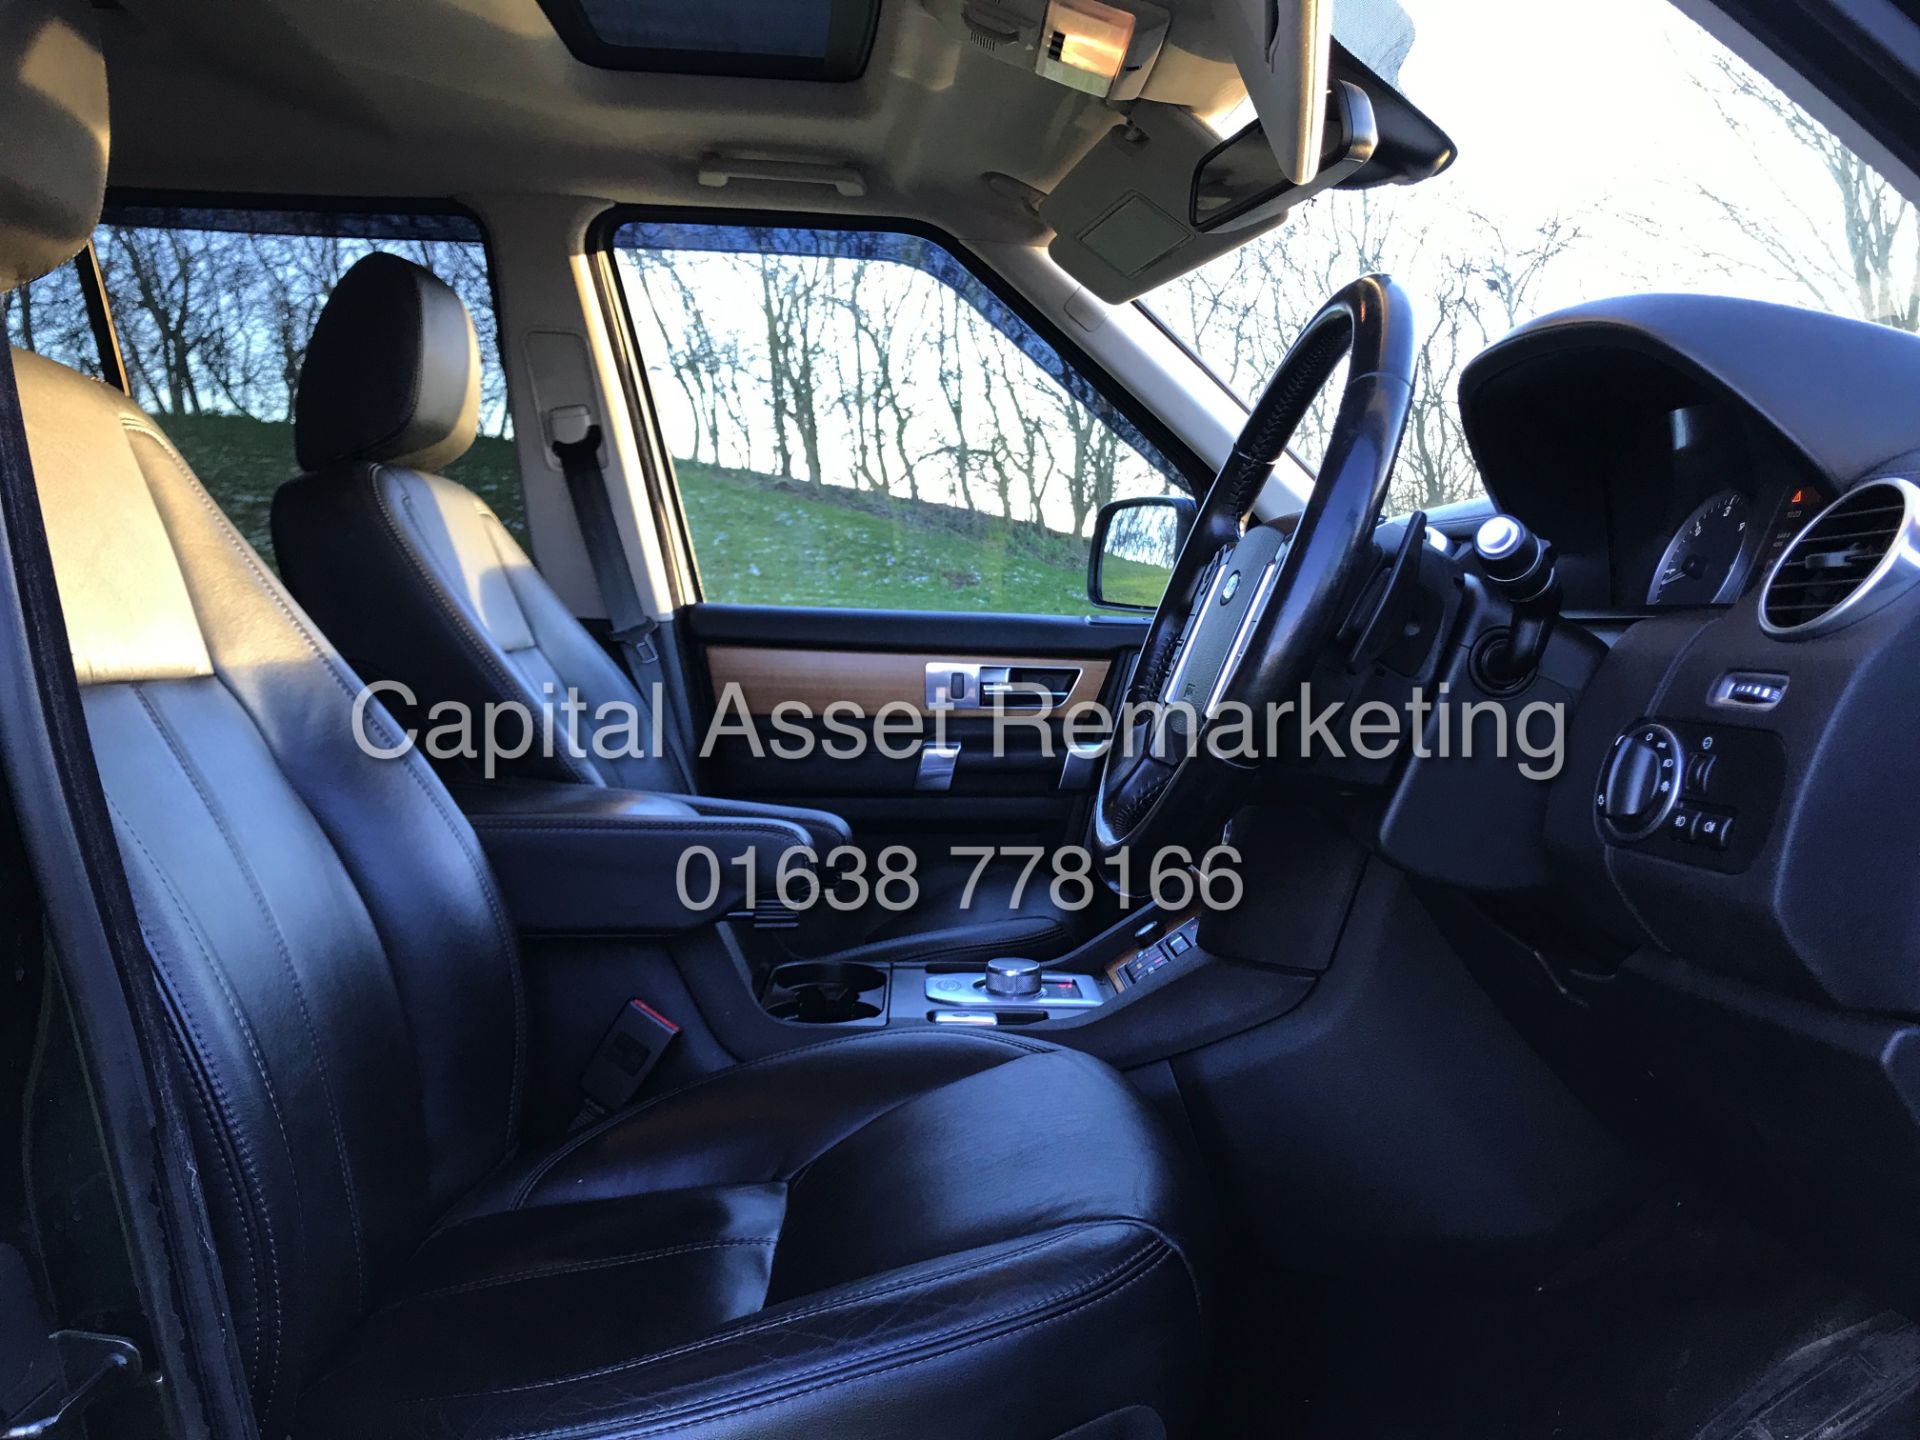 (ON SALE) LAND ROVER DISCOVERY 4 "HSE" 3.0 SDV6 AUTO (13 REG) 7 SEATER - TOP SPEC - SAT NAV -LEATHER - Image 8 of 31